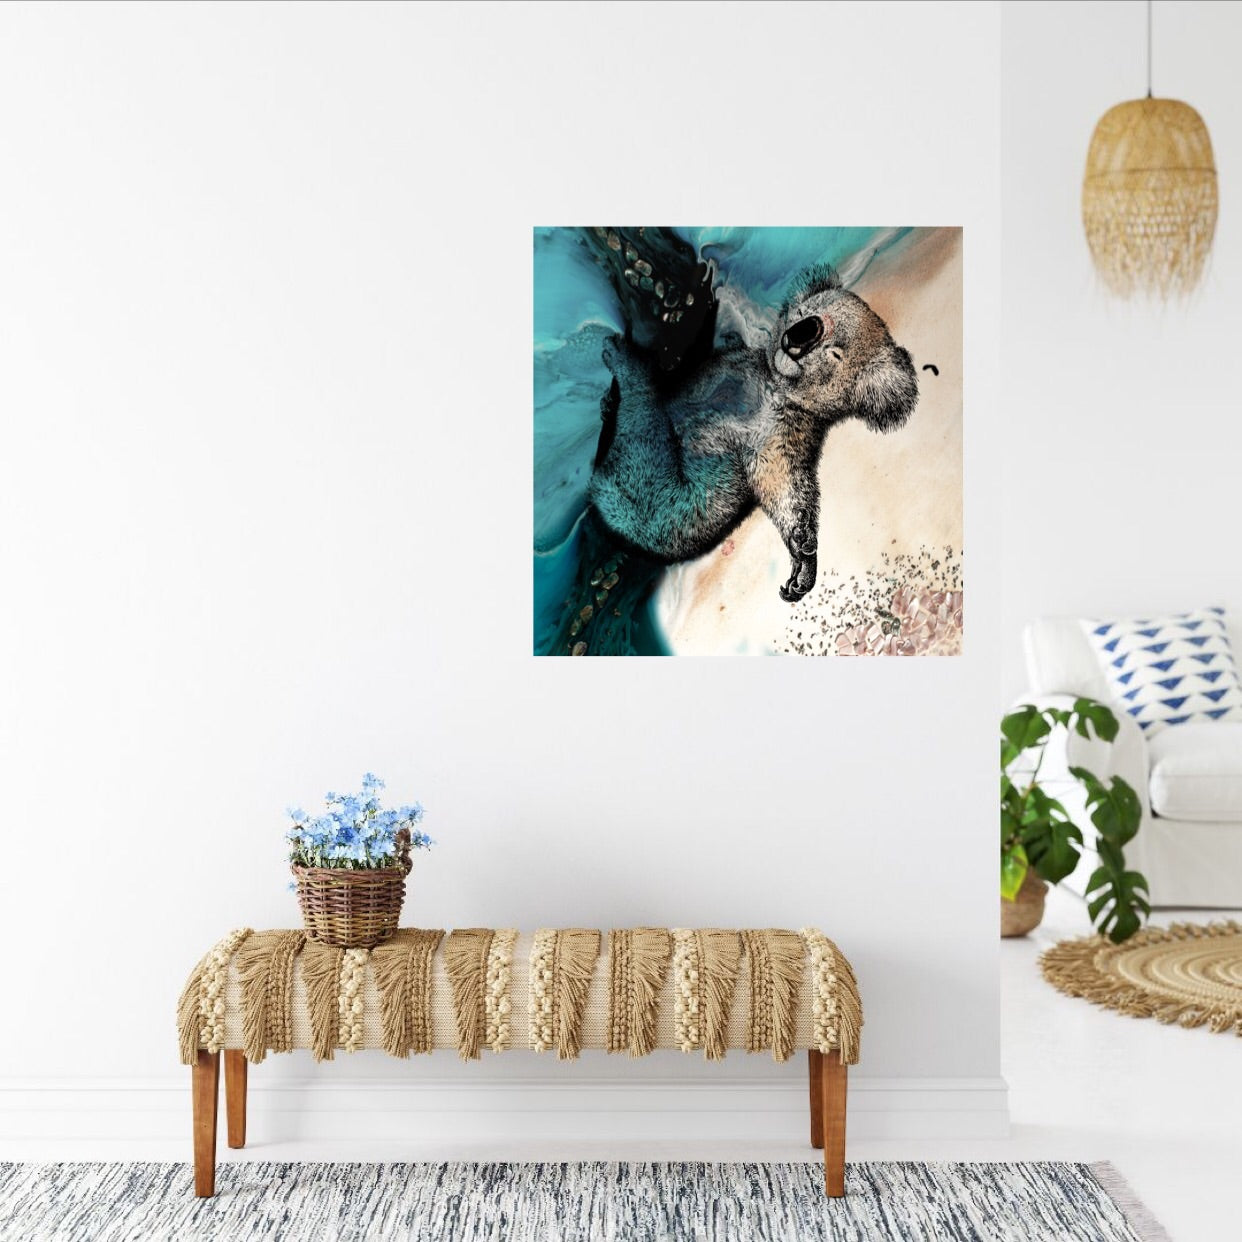 Abstract Seascape. Teal seascape with Koala. Art Print. Antuanelle 2 Sleeping Beauty. Print for WIRES Wildlife Rescue. Limited Edition